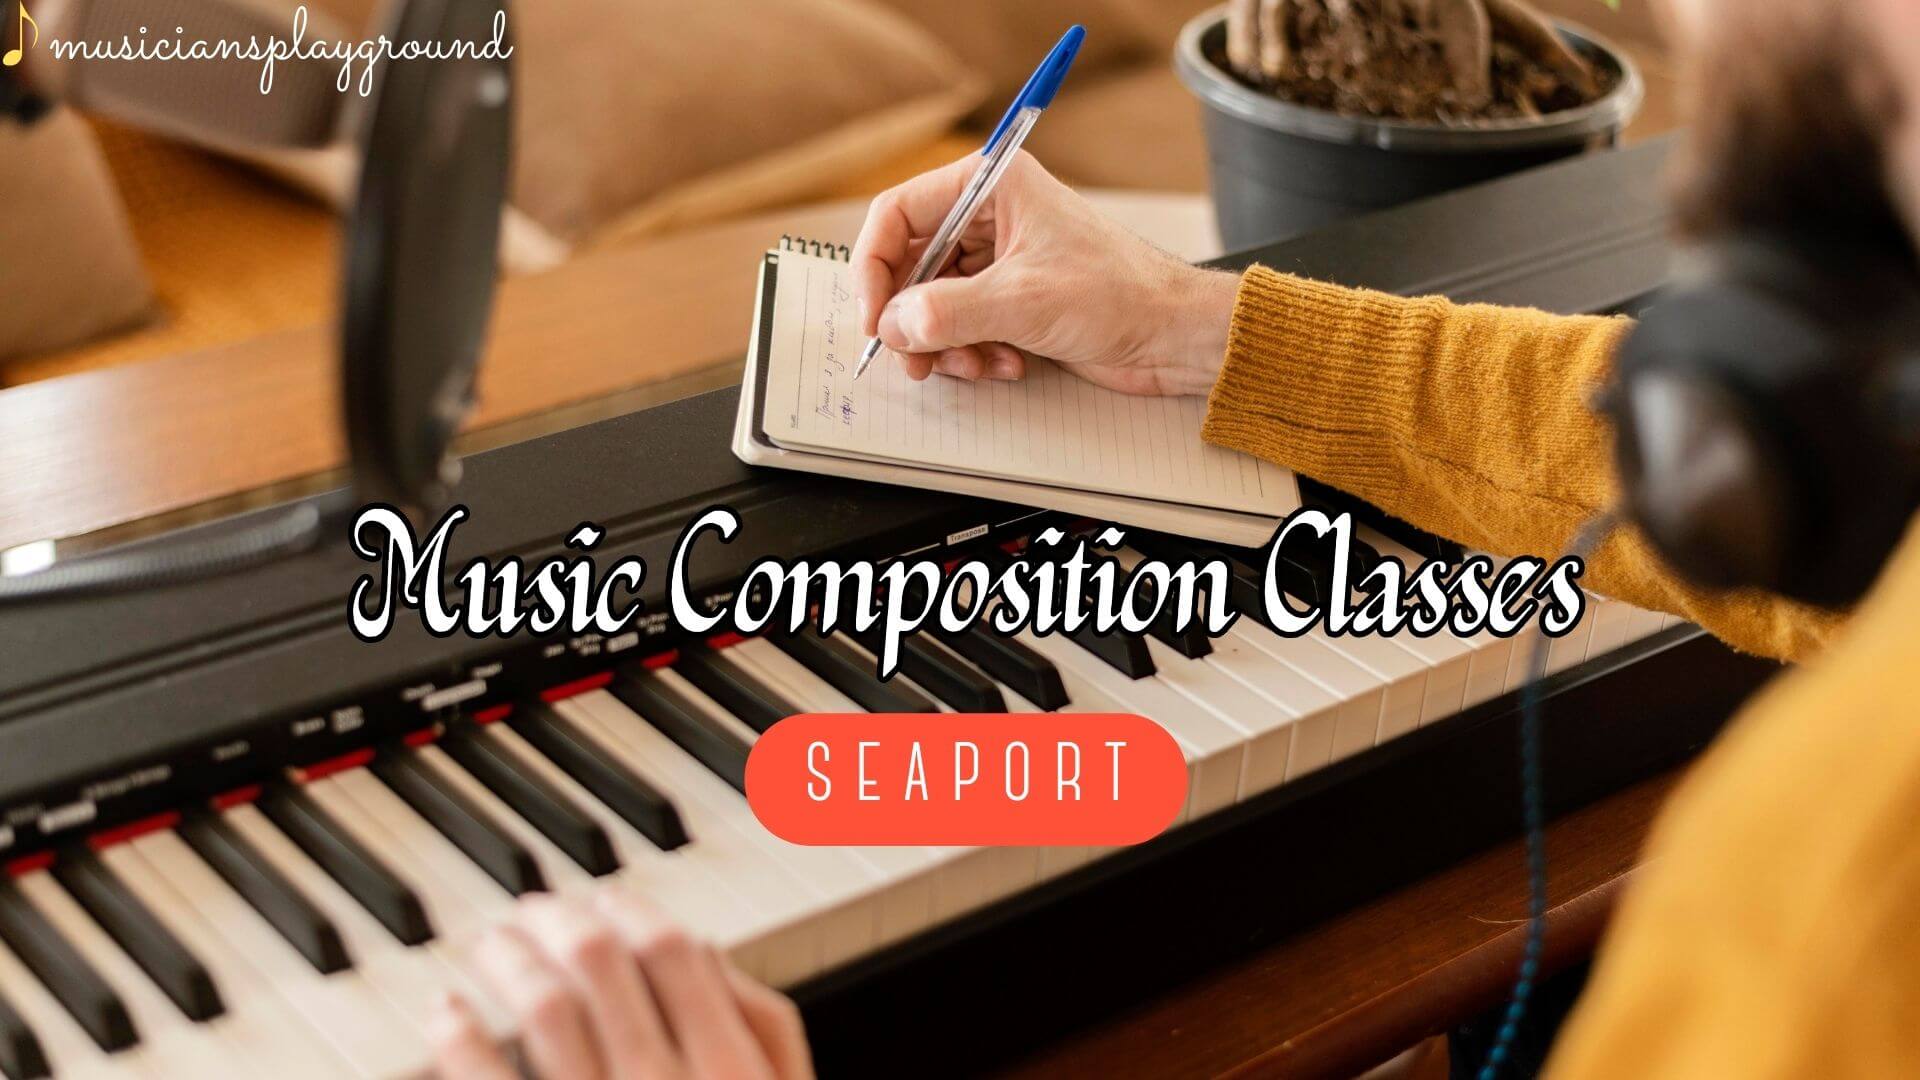 Music Composition Classes in Seaport, Massachusetts: Unlock Your Musical Potential at Musicians Playground